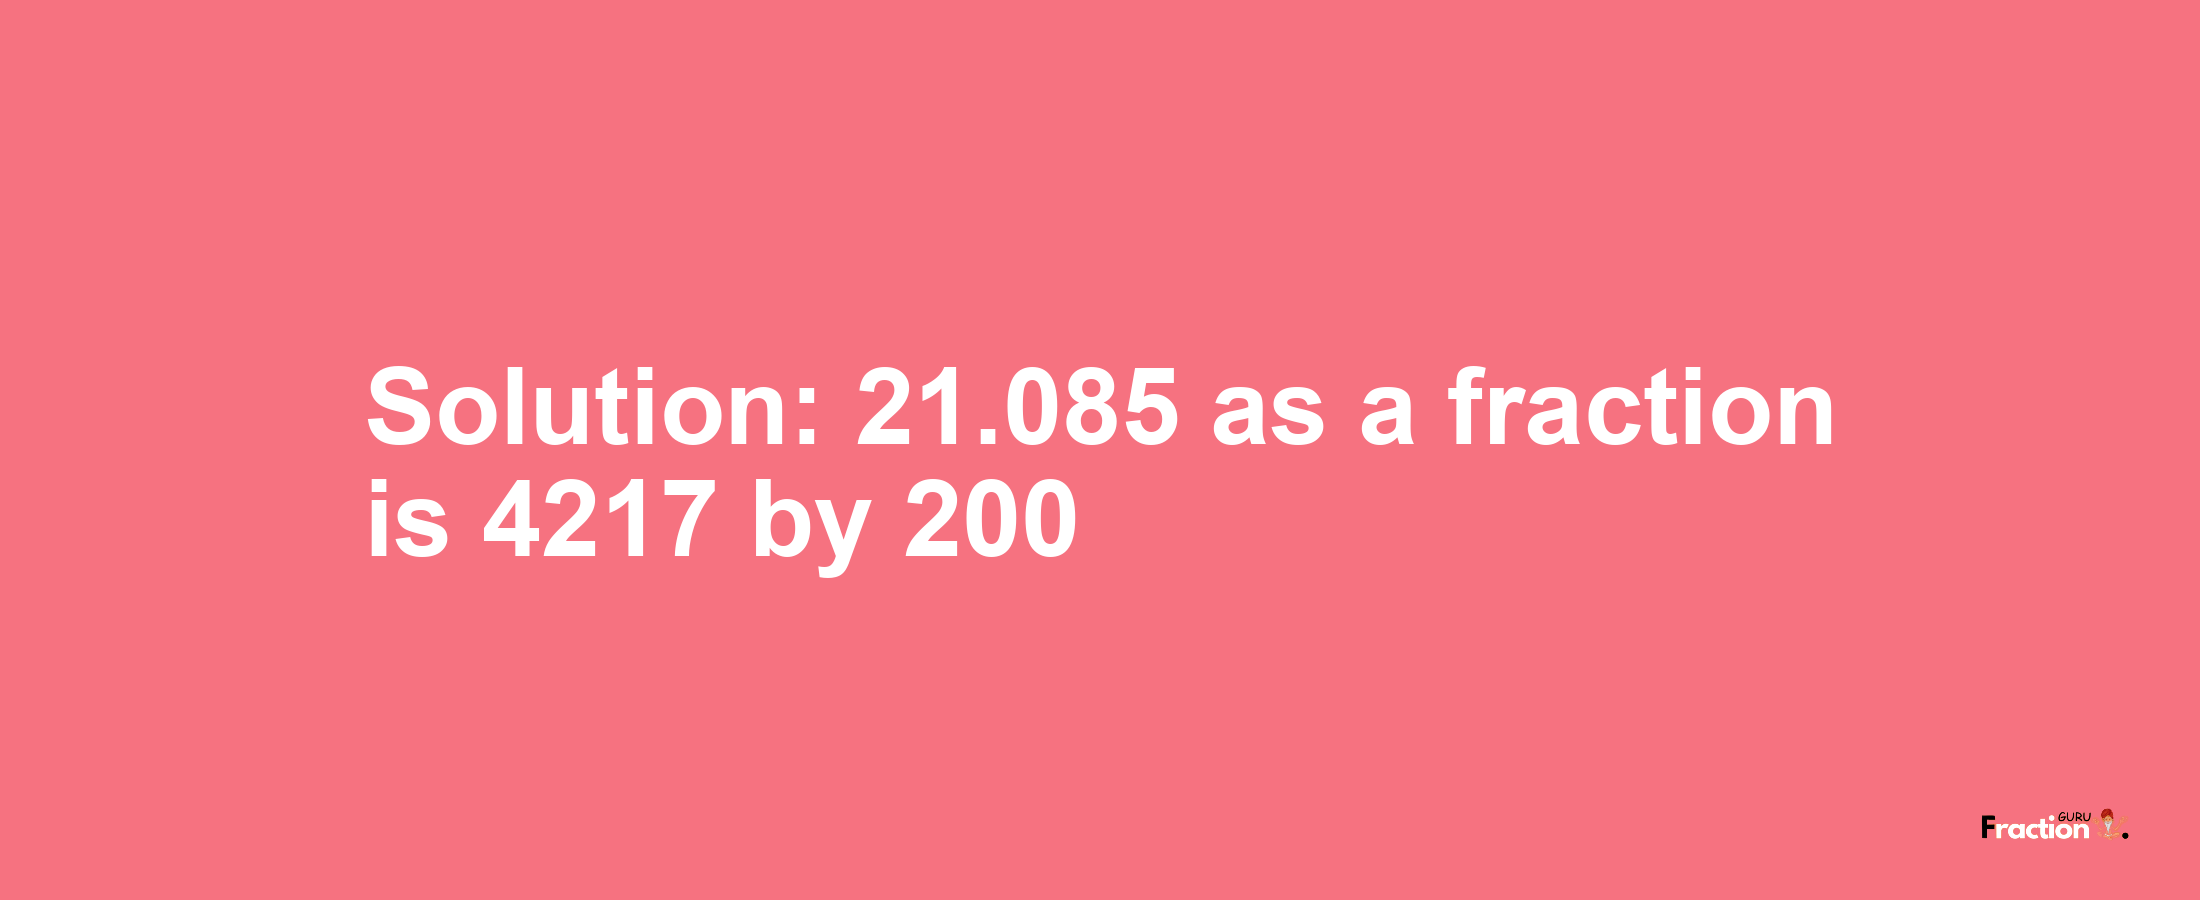 Solution:21.085 as a fraction is 4217/200